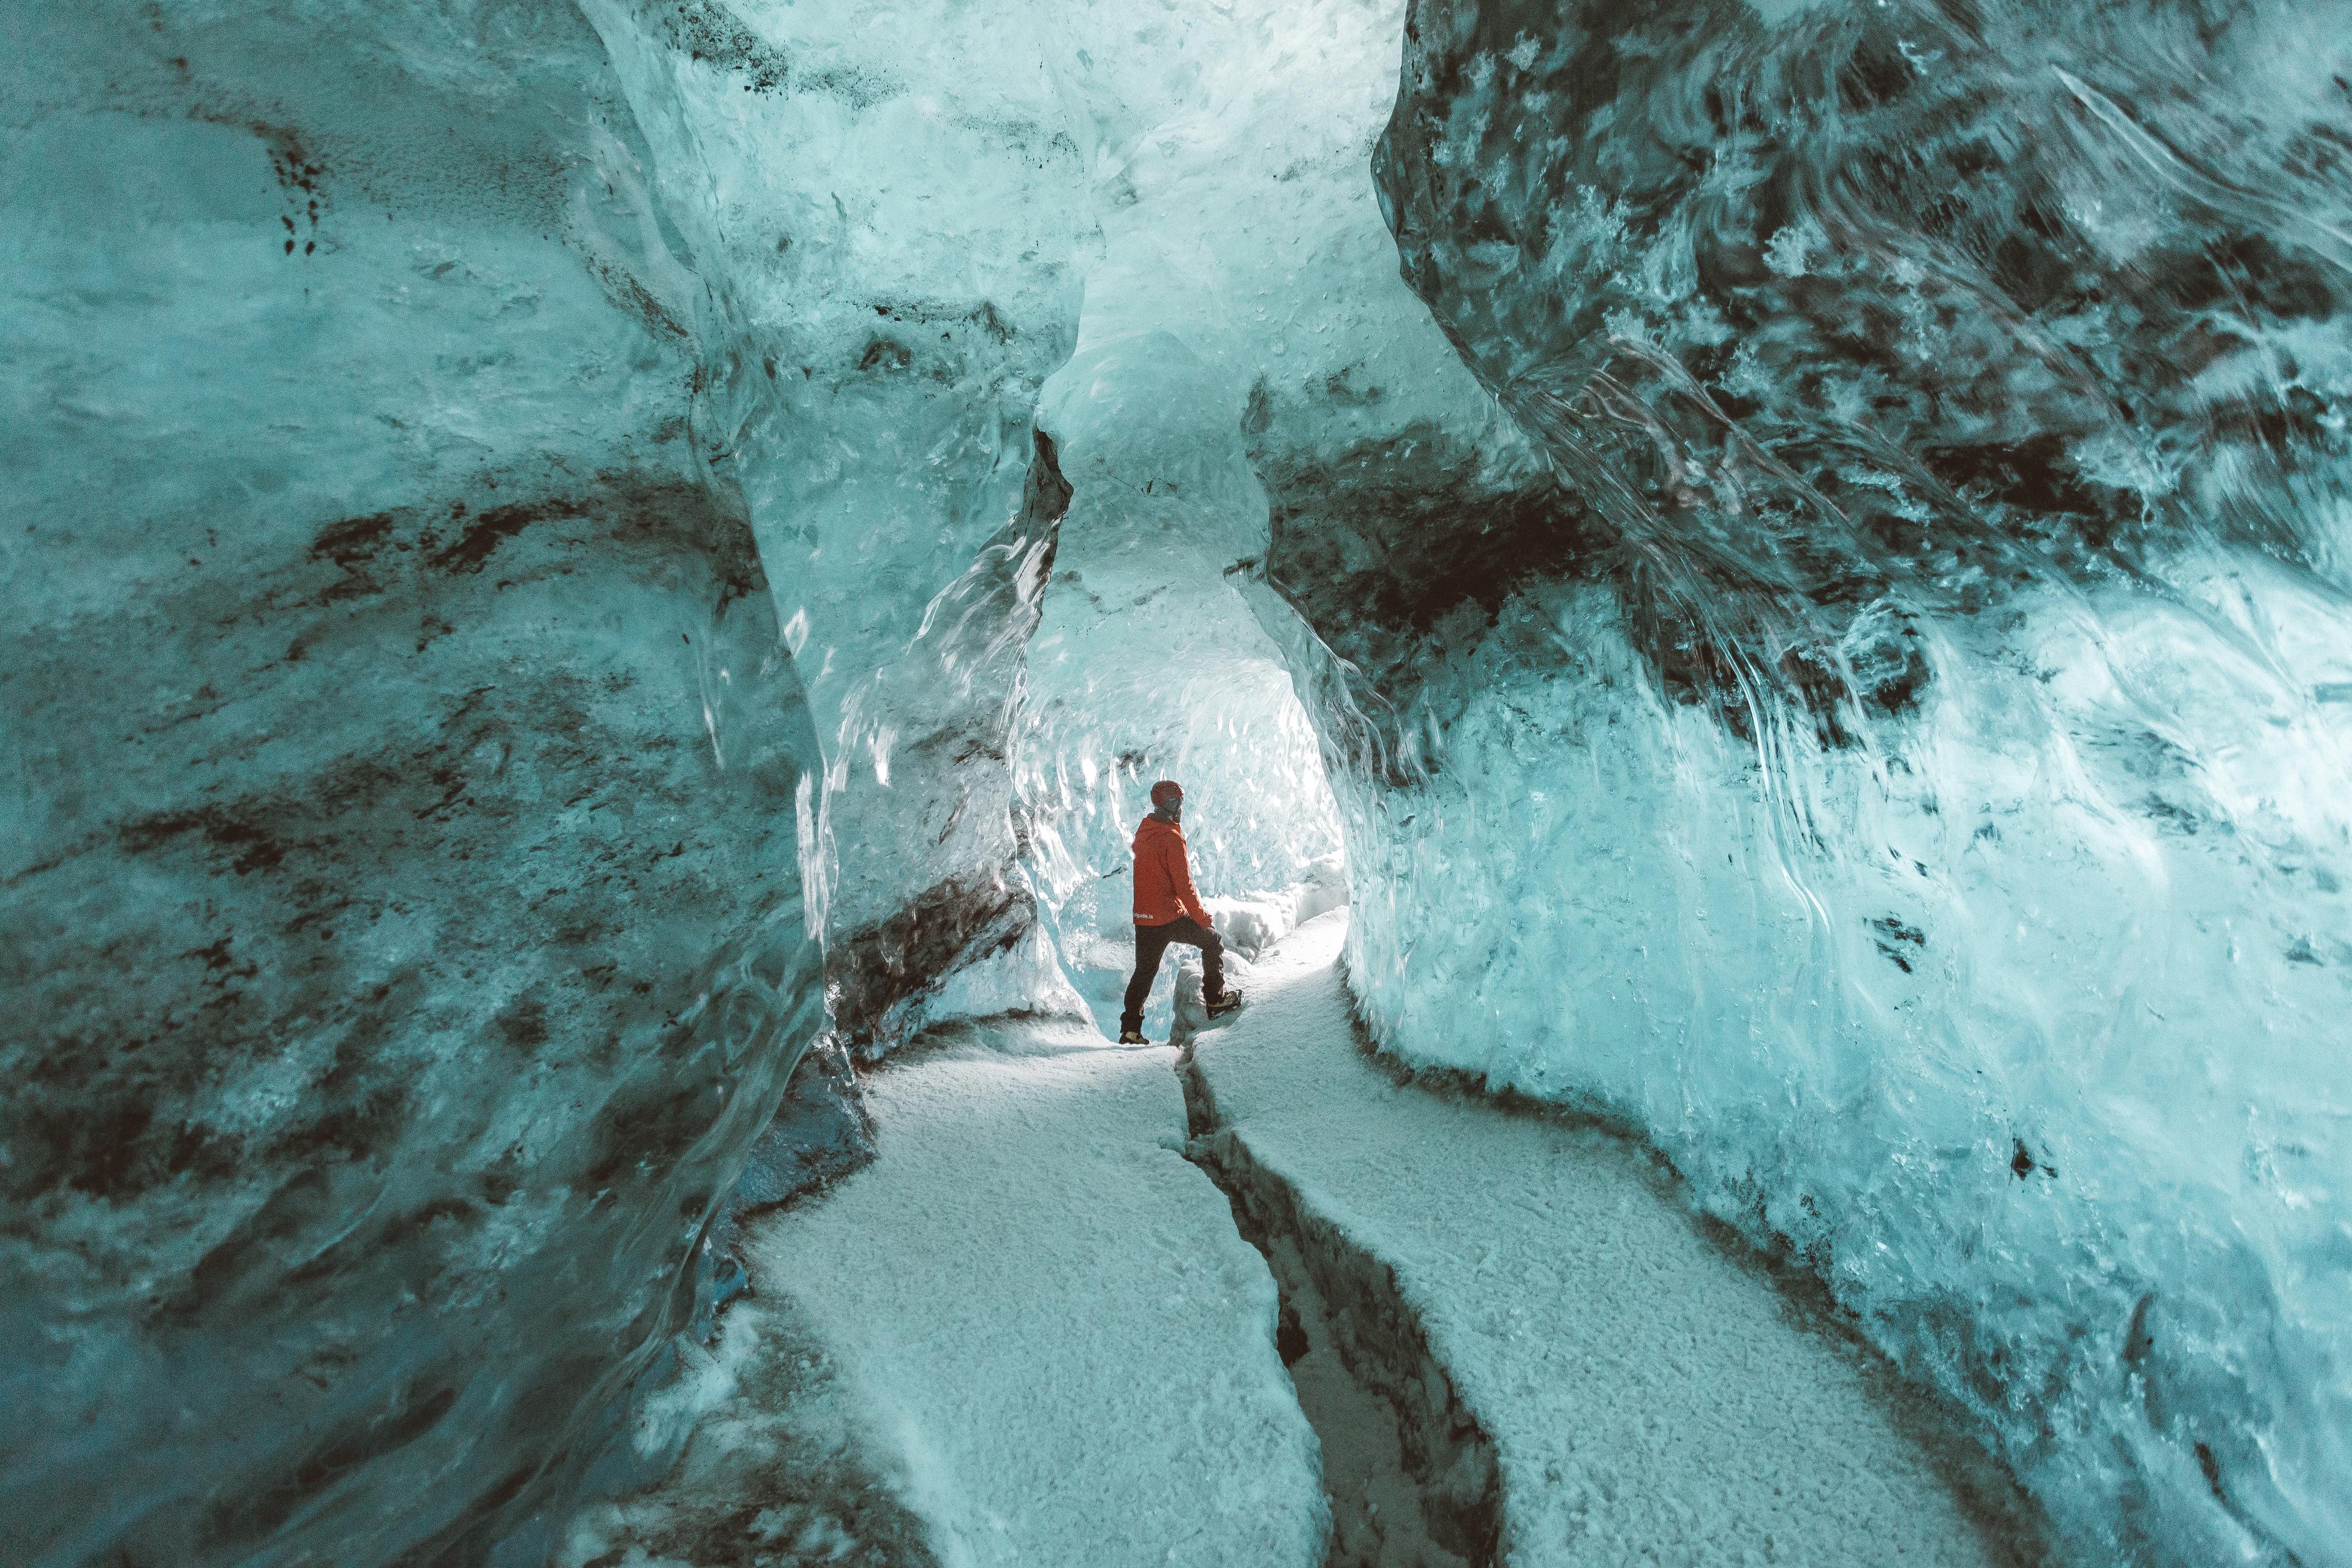 A person silhouetted against the luminous blue walls of an ice cave, emphasizing the vastness and ethereal beauty of the frozen cavern.